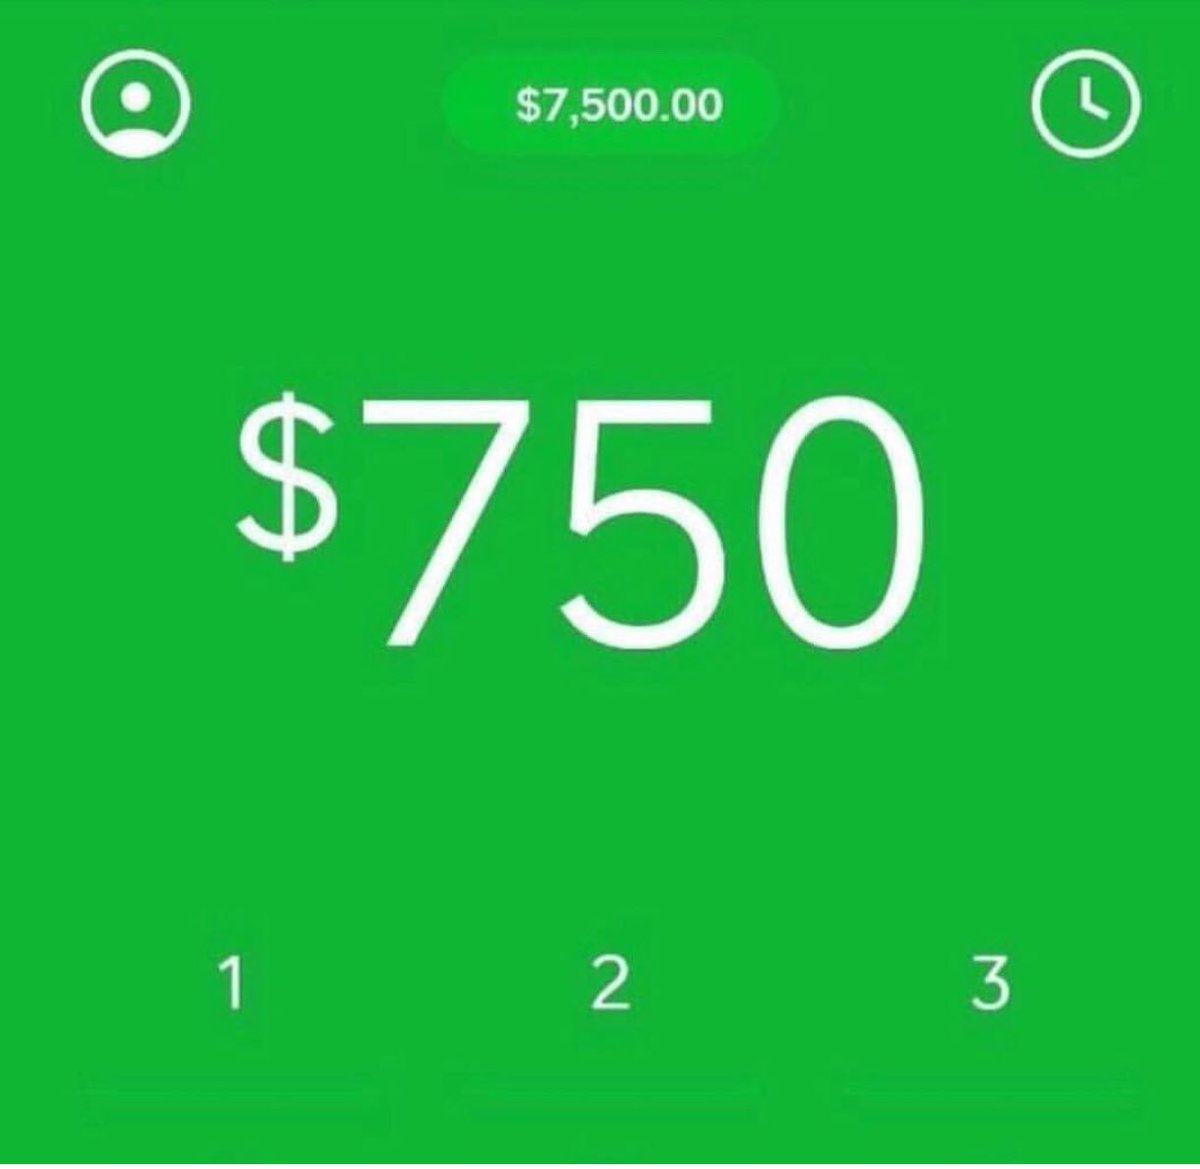 Stormy On Twitter Doing Cashapp Flips 25 150 50 400 70 600 100 1000 110 1200 Custom From There Also Bots Social Media Have Money Ready Flyrts Twitchretweetr Graphicsguild Supstreamers Retweet Twitch Demented Rts Gfxcoach